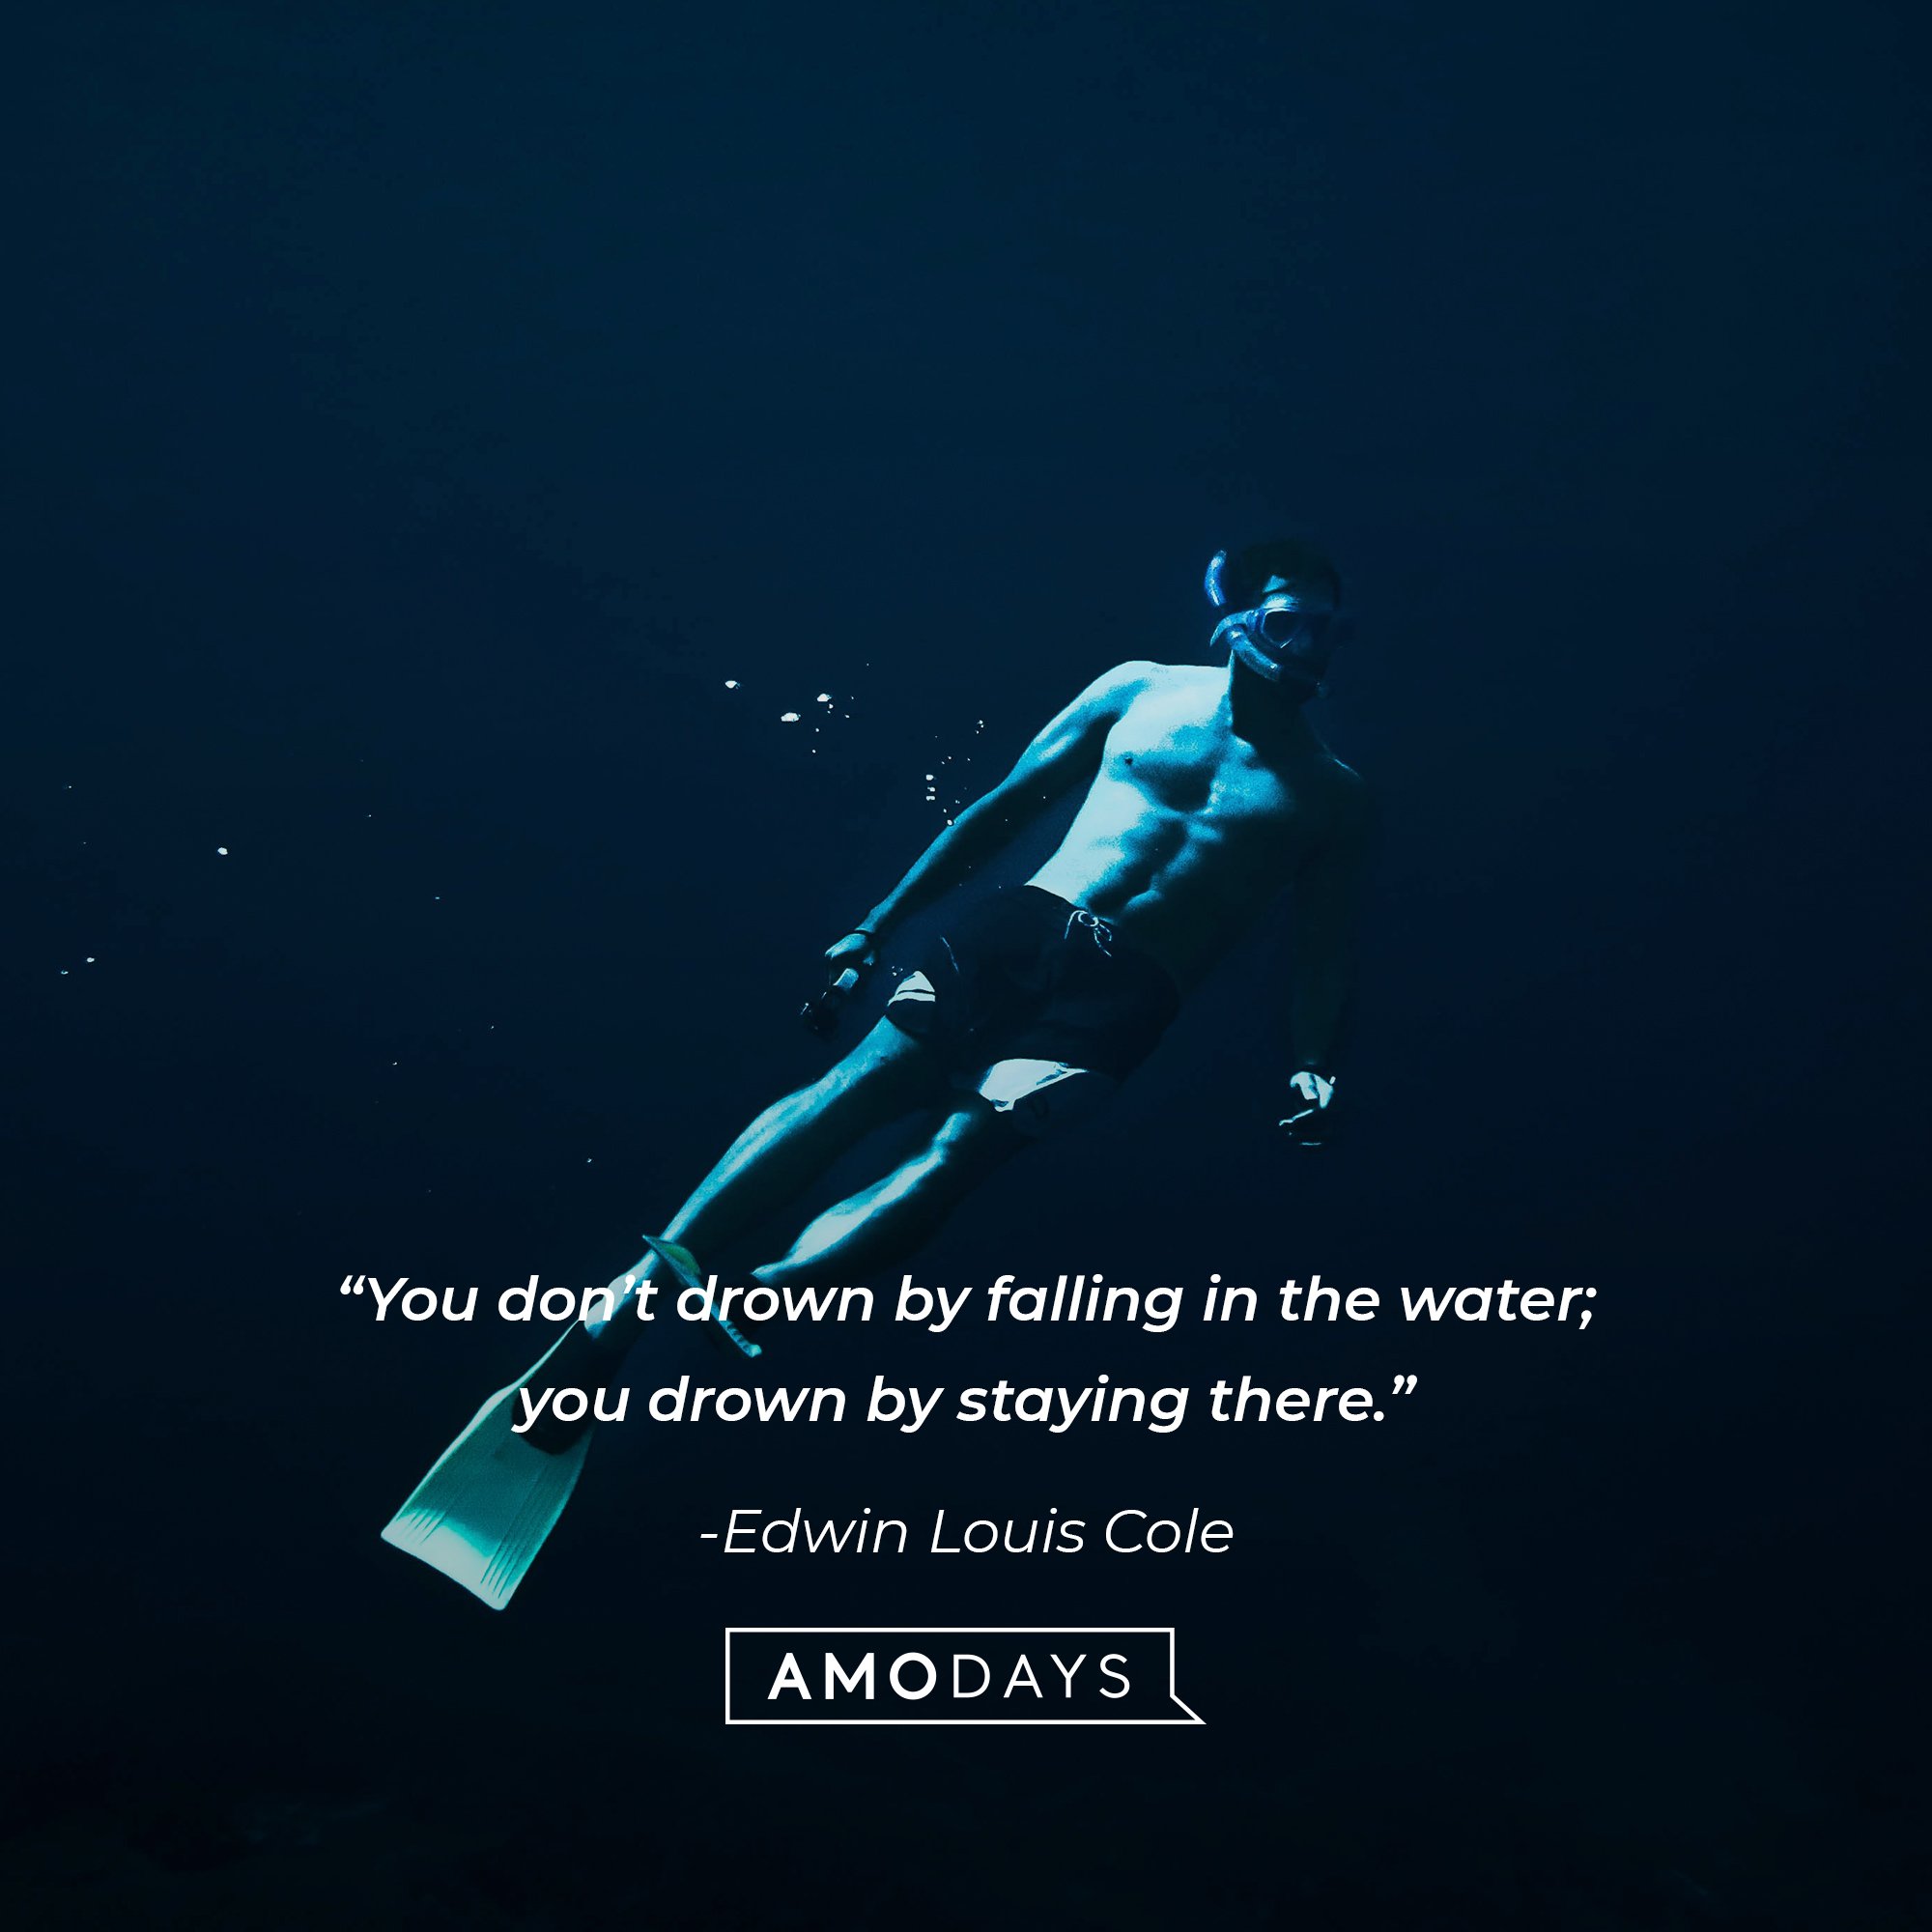 Edwin Louis Cole’s quote: "You don't drown by falling in the water; you drown by staying there." | Image: AmoDays